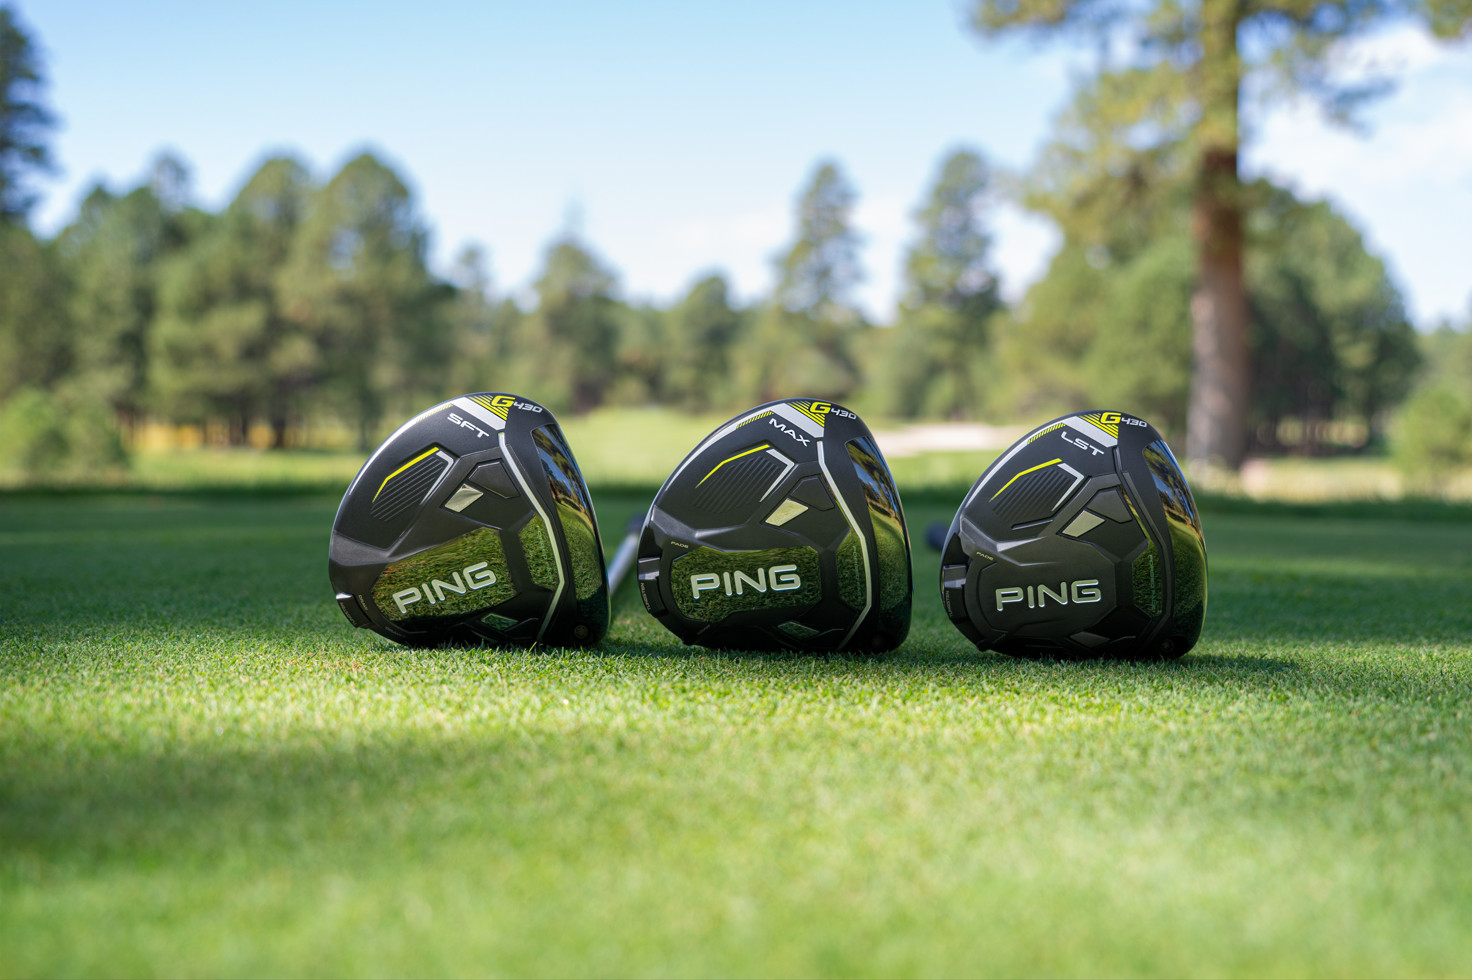 PING G430 Driver works its way into winner's circle